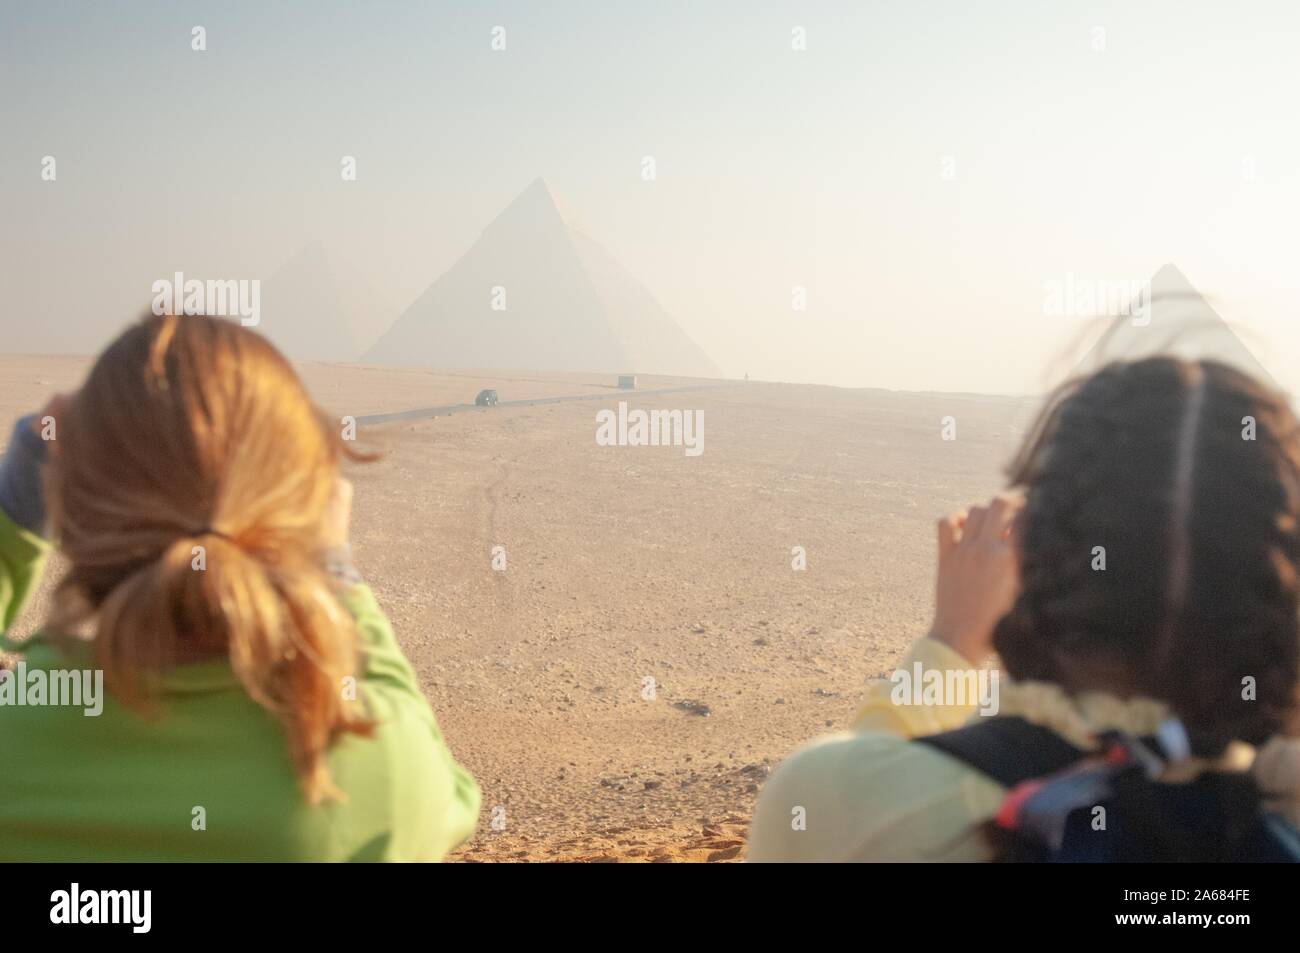 Over the shoulder shot of two Johns Hopkins University students, outside on a sunny day, taking photographs of a pair of pyramids in the distance, Giza, Egypt during a study abroad program, January 7, 2008. From the Homewood Photography Collection. () Stock Photo